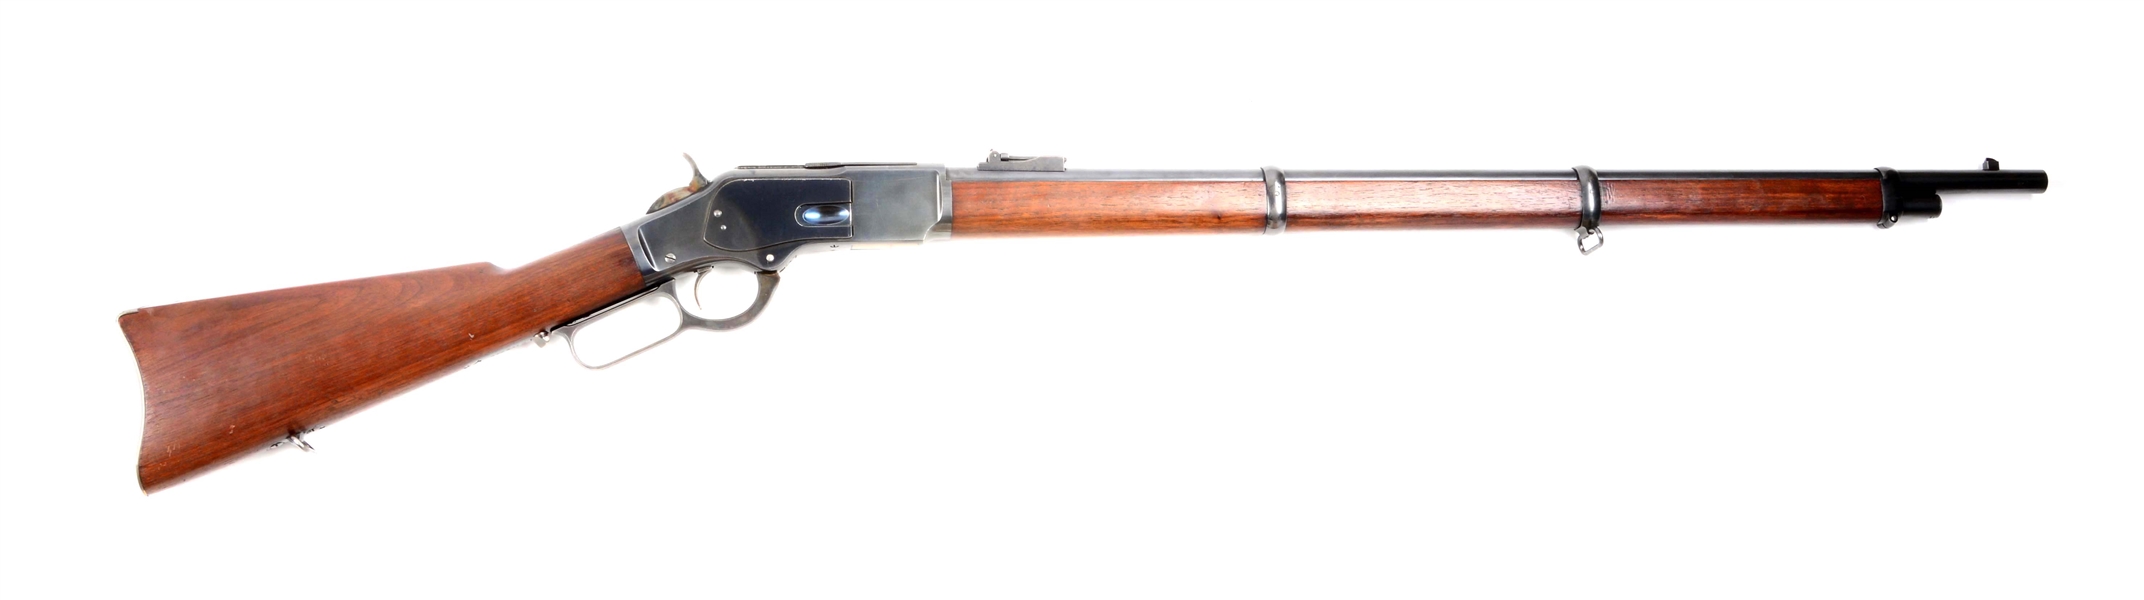 (C) HIGH CONDITION WINCHESTER MODEL 1873 MUSKET.